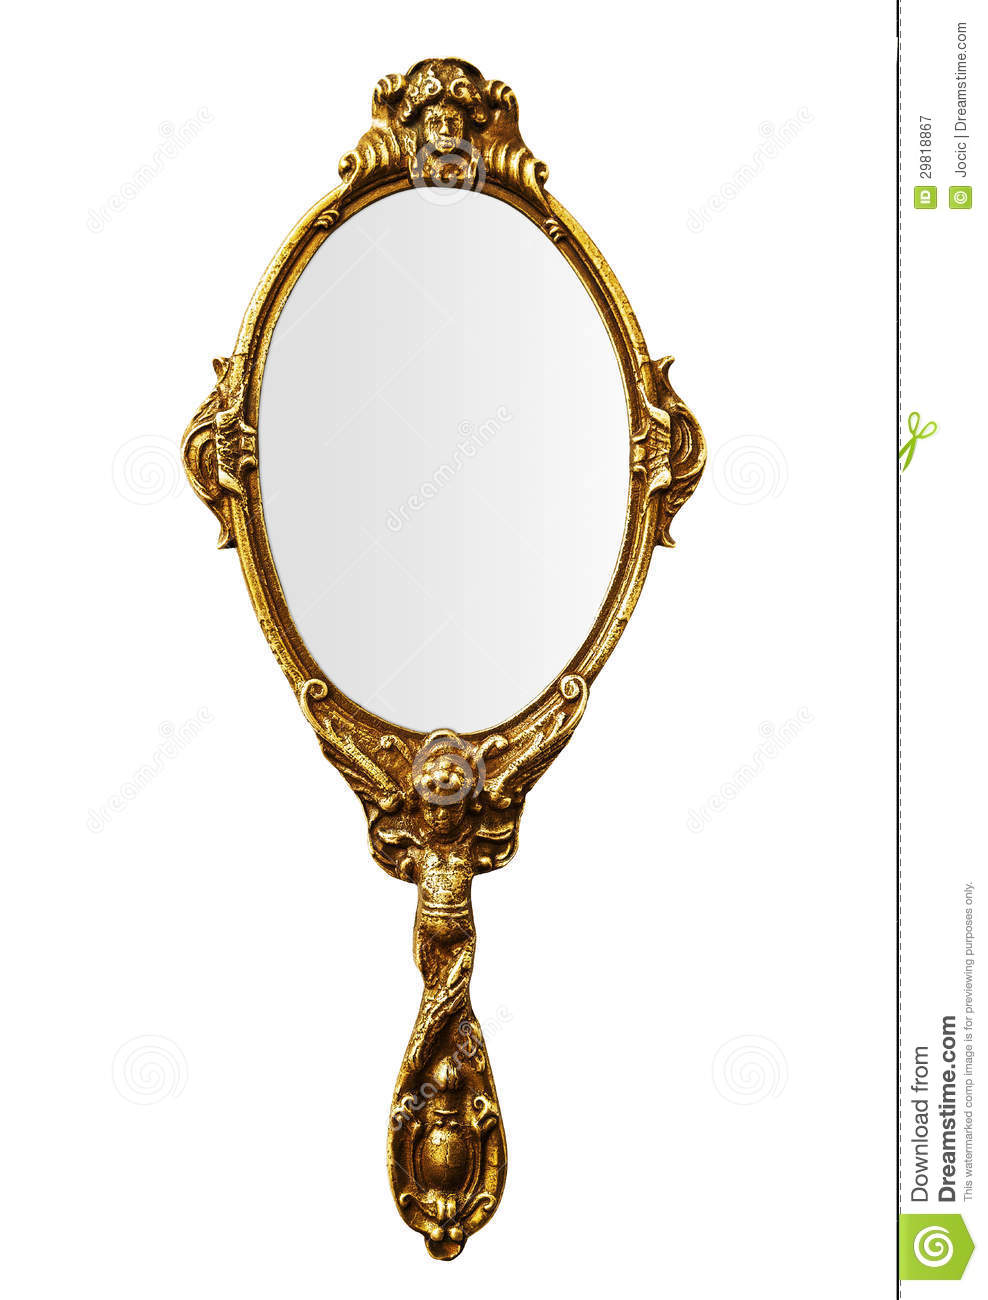 Hand Held Mirror Clipart Vintage Hand Mirror Royalty Free Stock